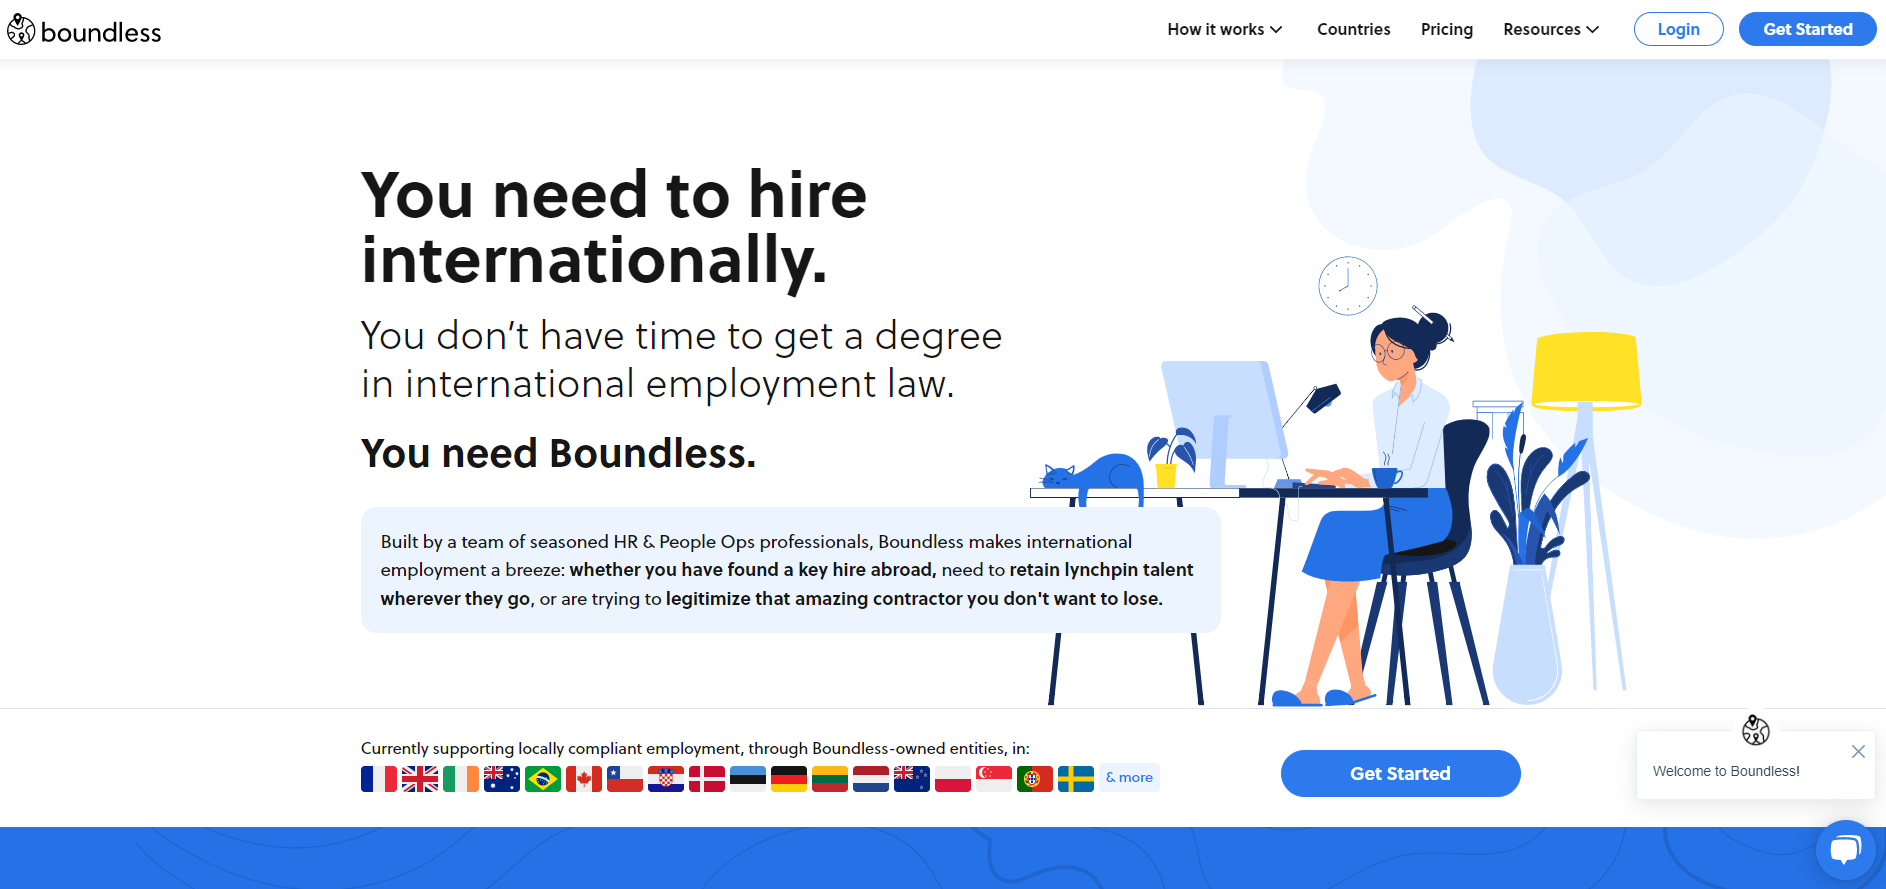 Built by a team of seasoned HR & People Ops professionals, Boundless makes international employment a breeze